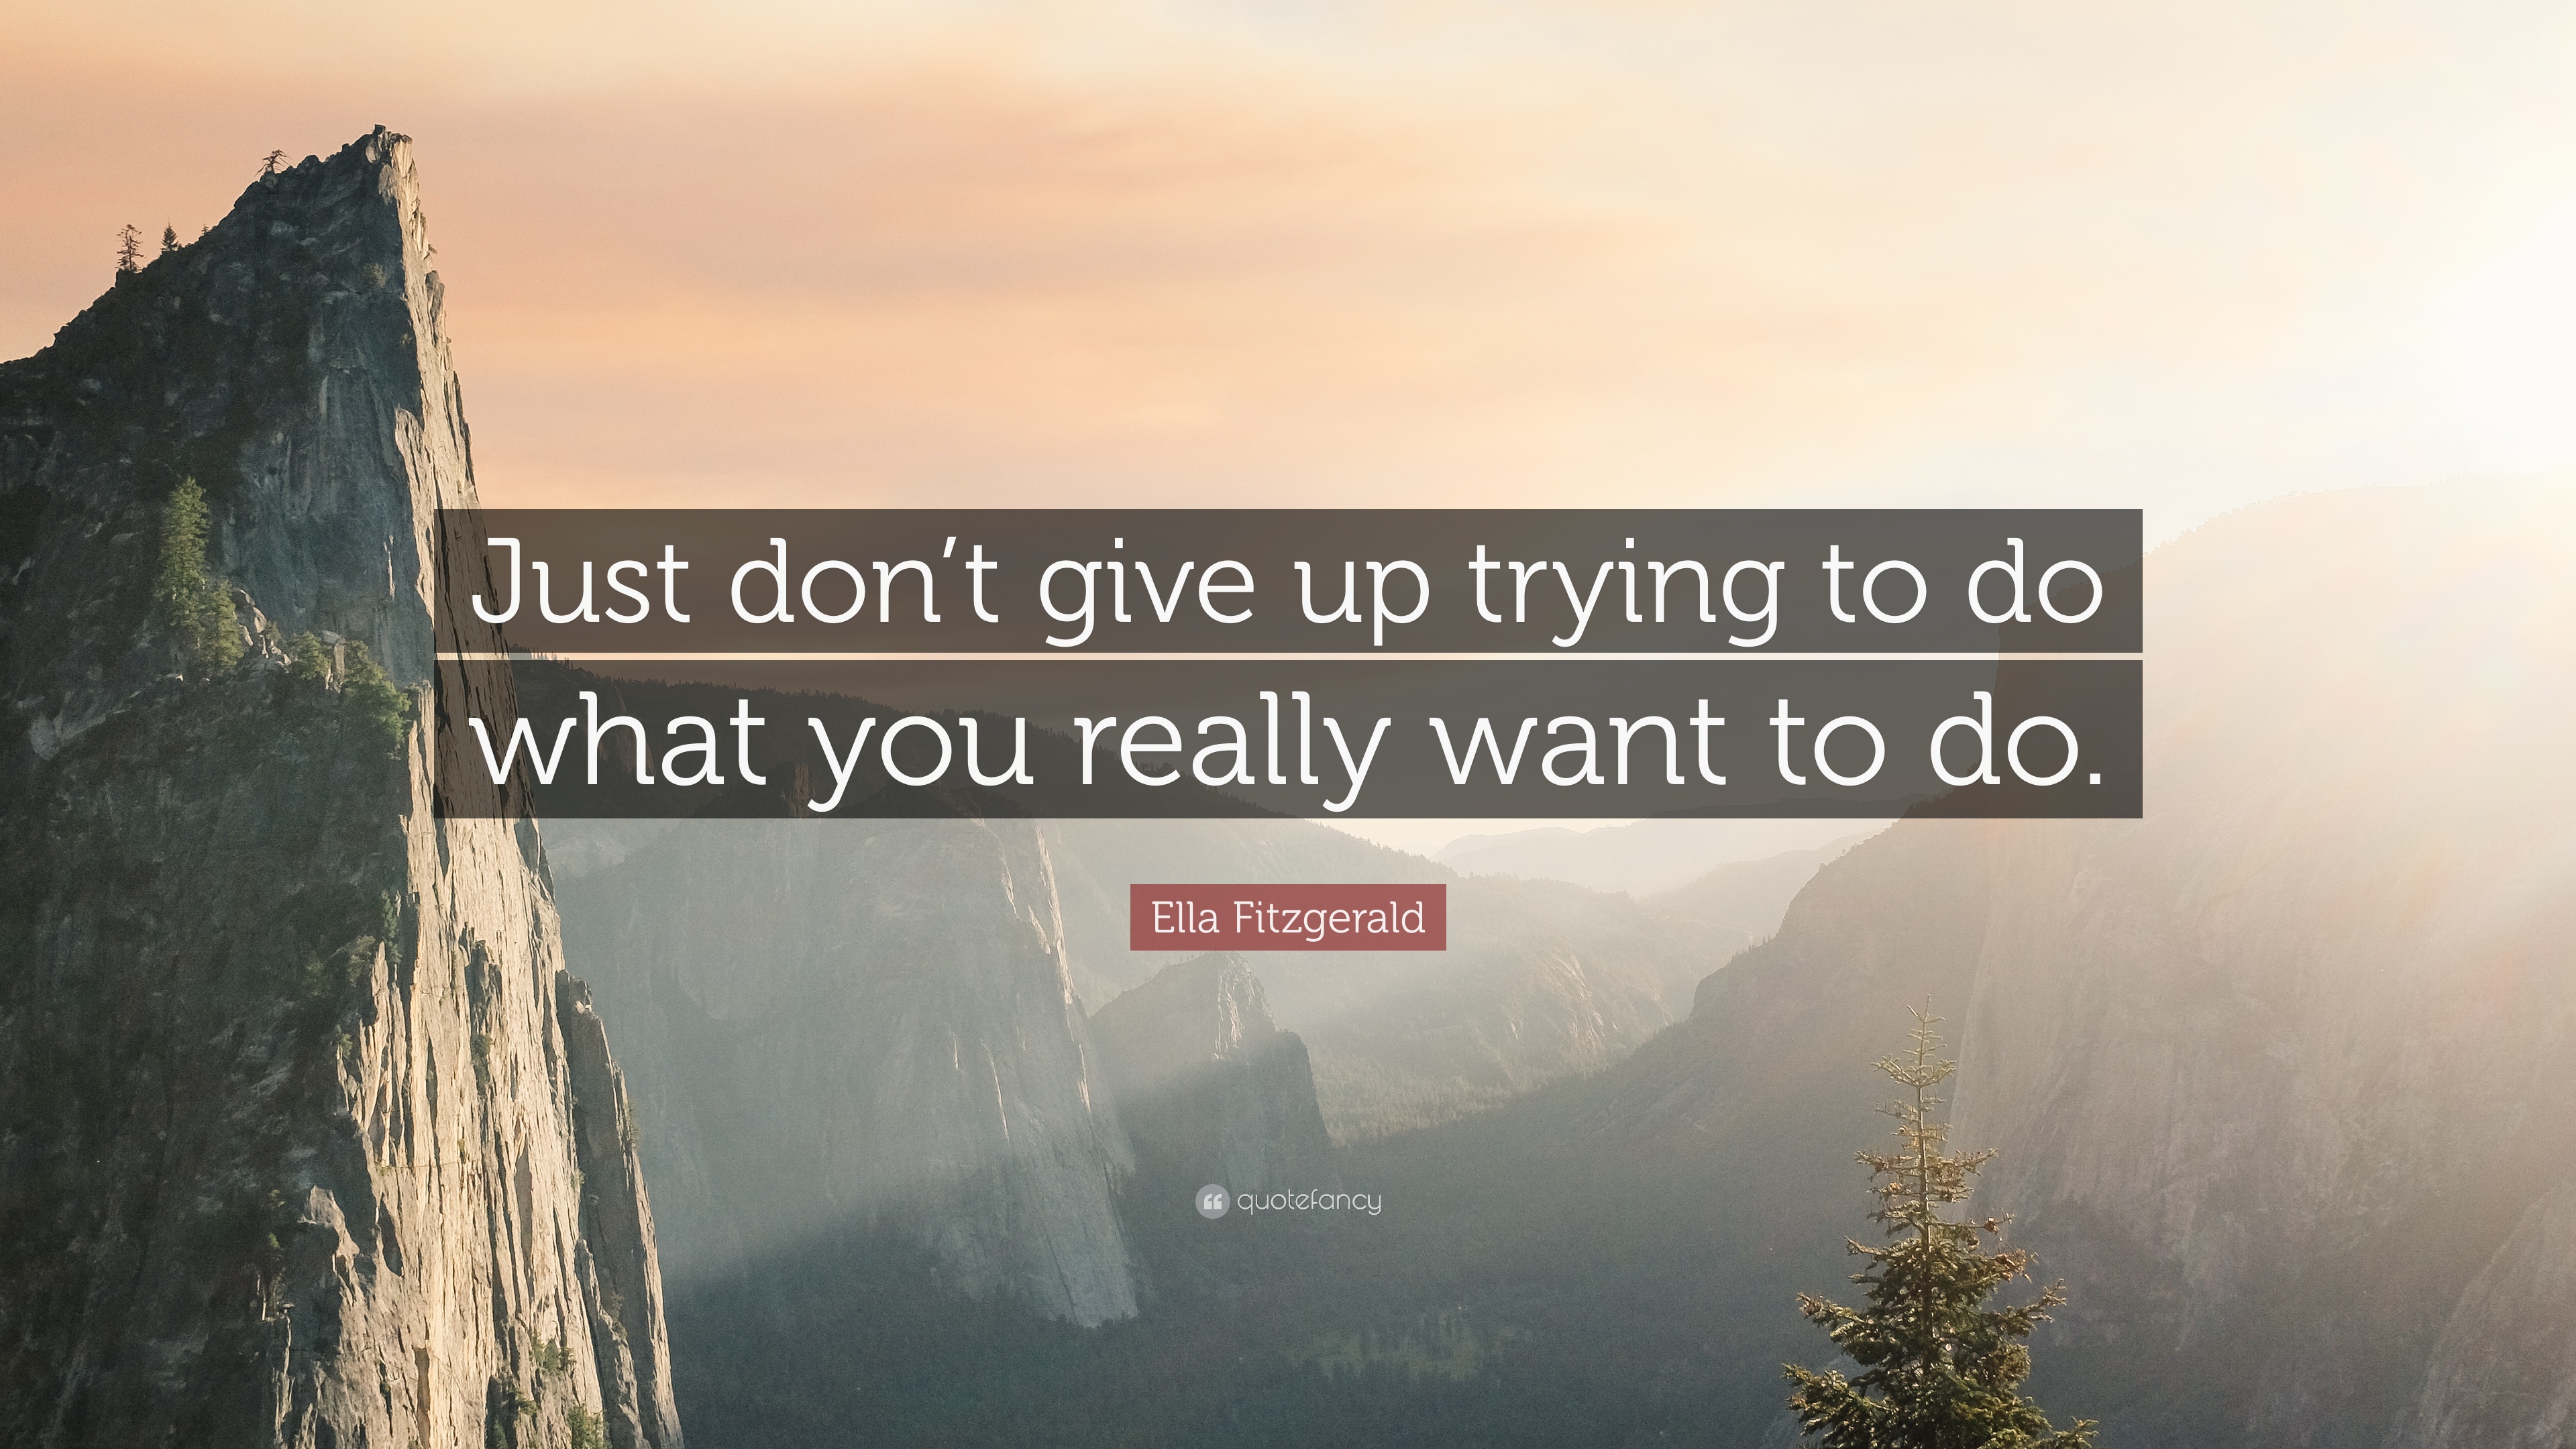 Ella Fitzgerald Quote: “Just don't give up trying to do what you ...